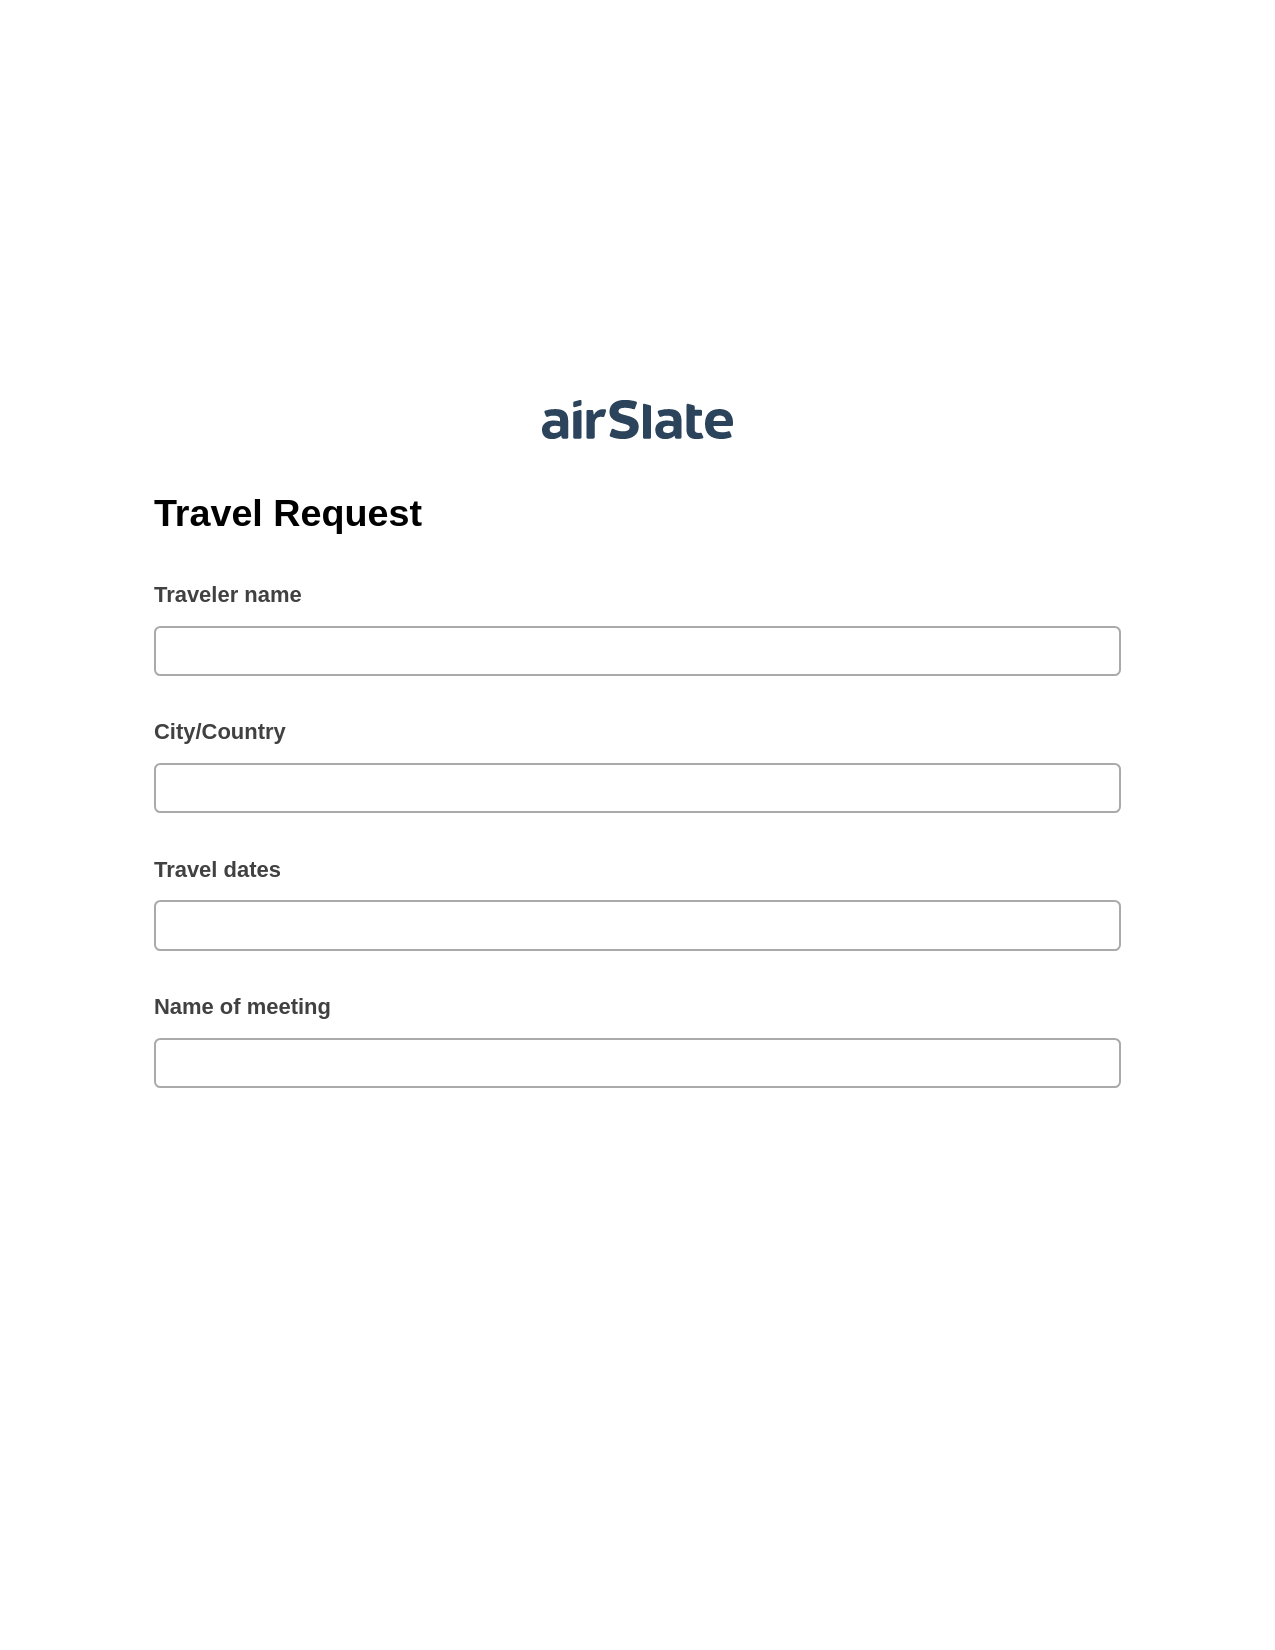 Travel Request Pre-fill from Google Sheets Bot, Create slate addon, Export to NetSuite Record Bot